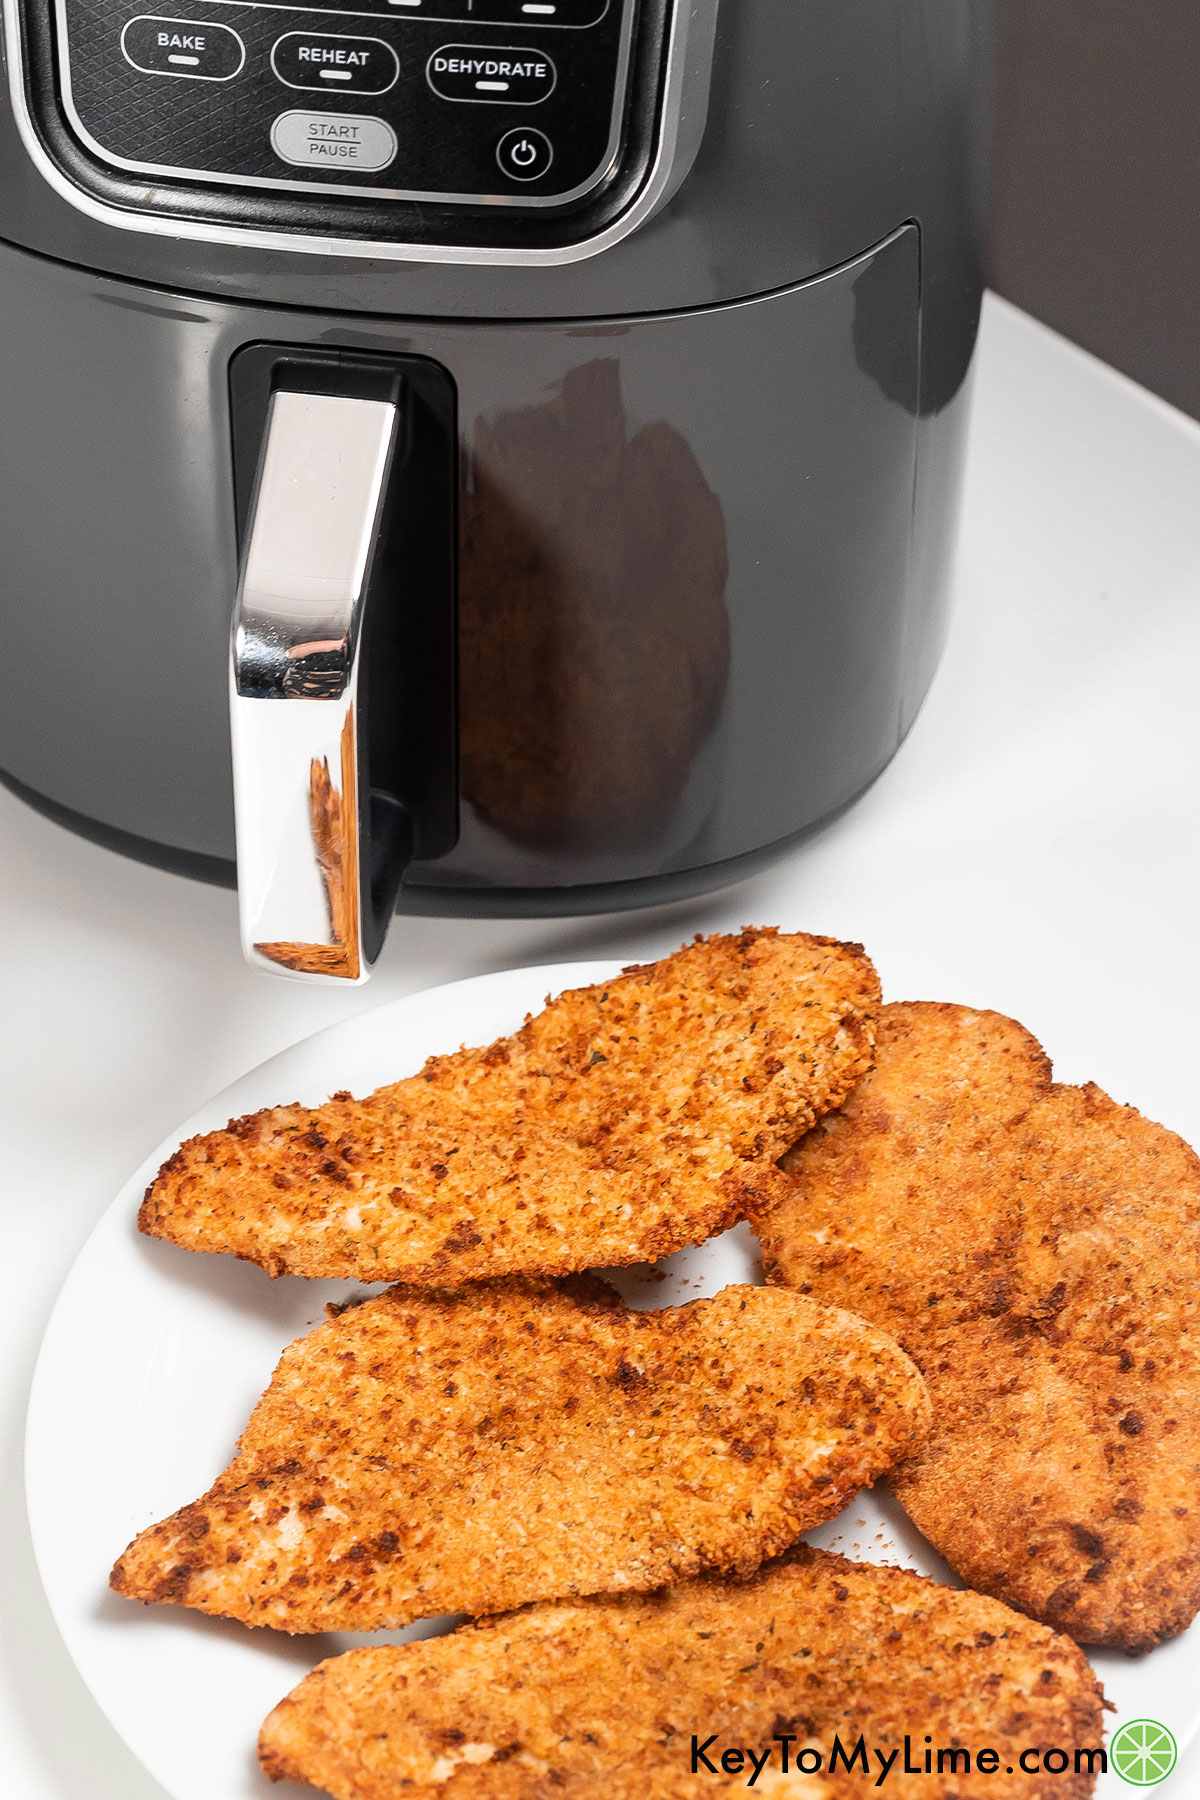 A plate of golden crispy cutlets with an air fryer in the background.